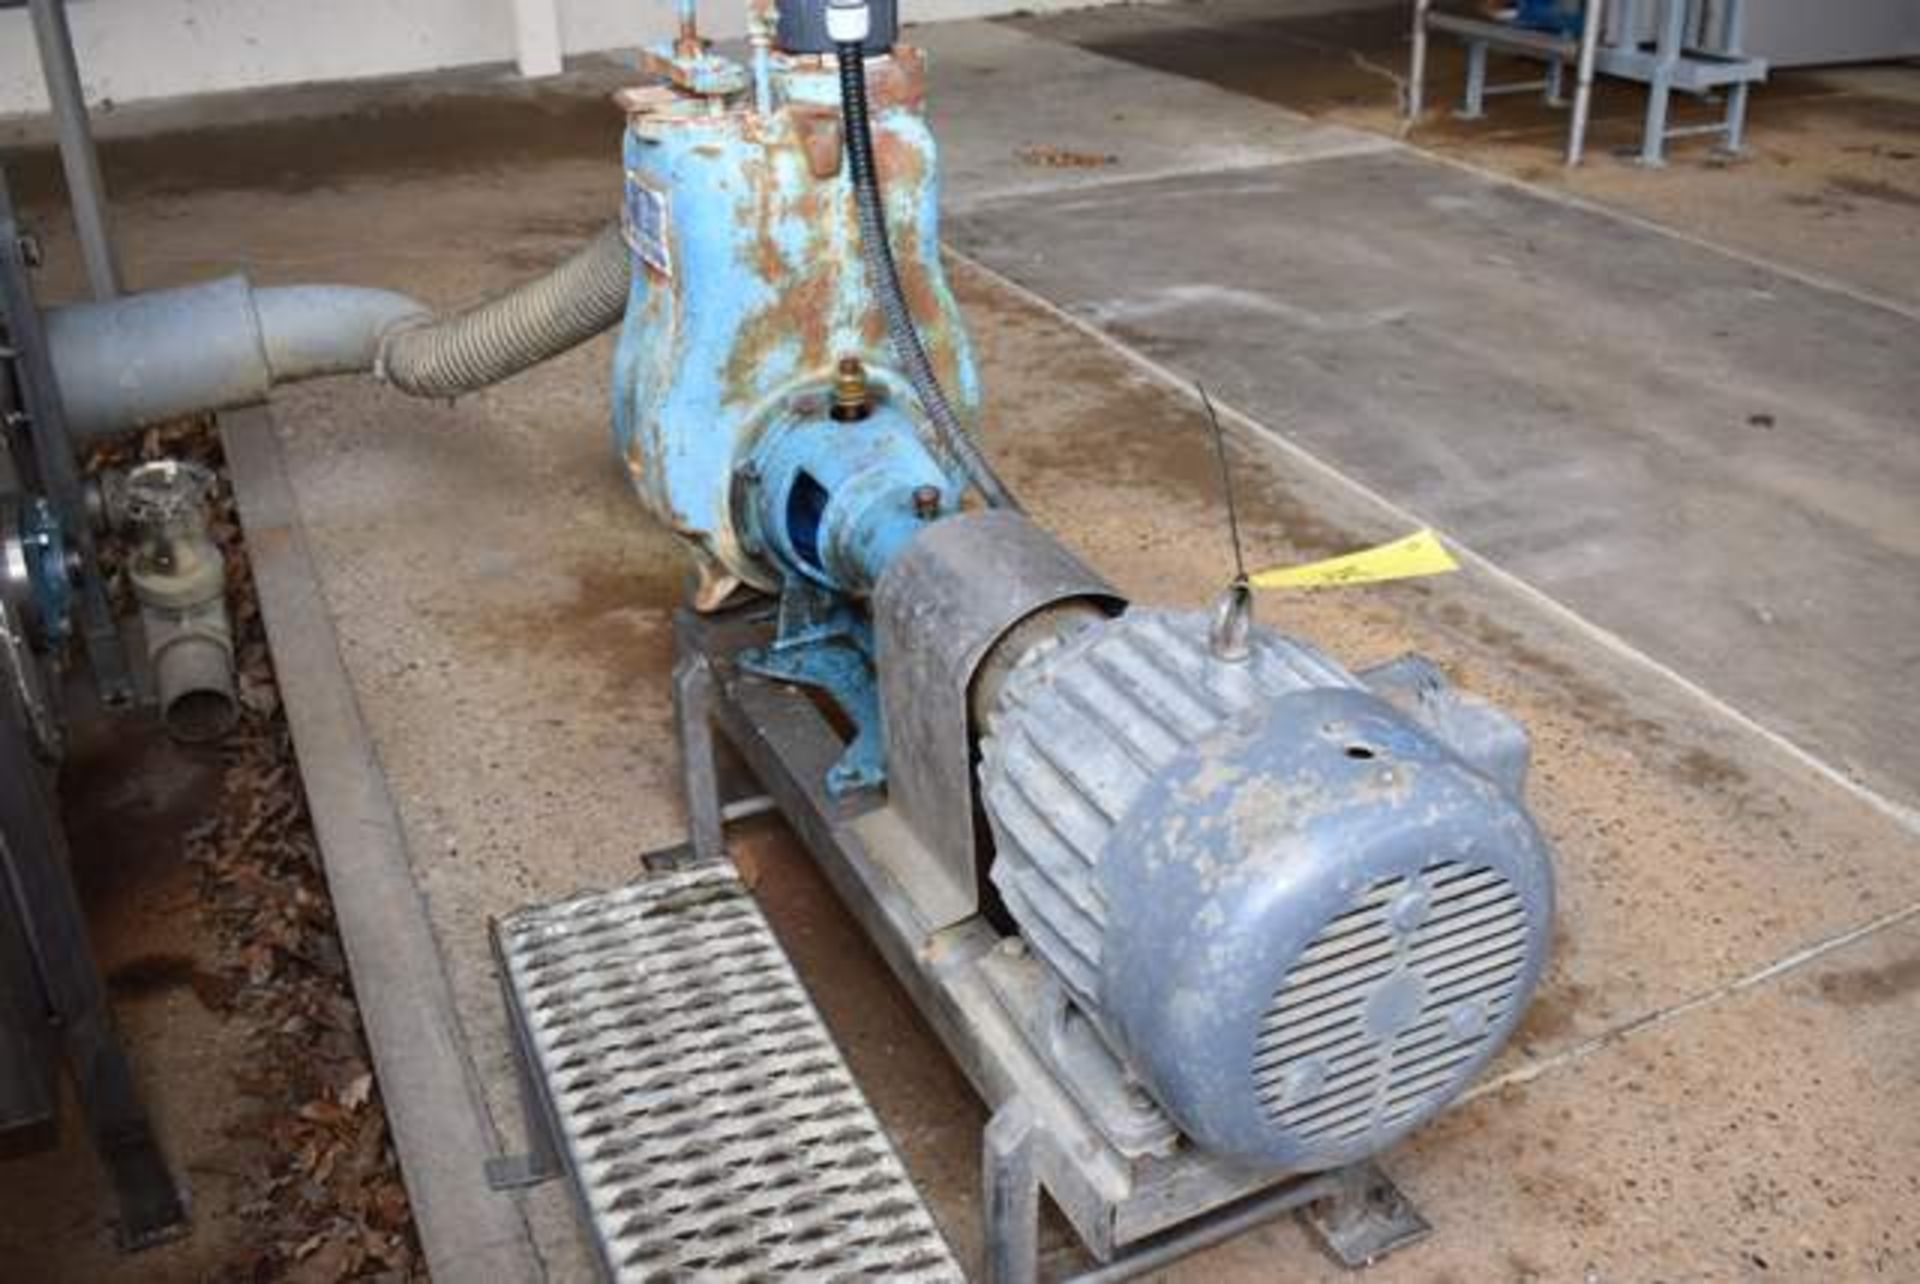 Gorman Rupp Model 14C20 -B, 4" Trash Pump, S/N 952701 , Equipped with l5HP Motor, Loading Fee: $250 - Image 2 of 3